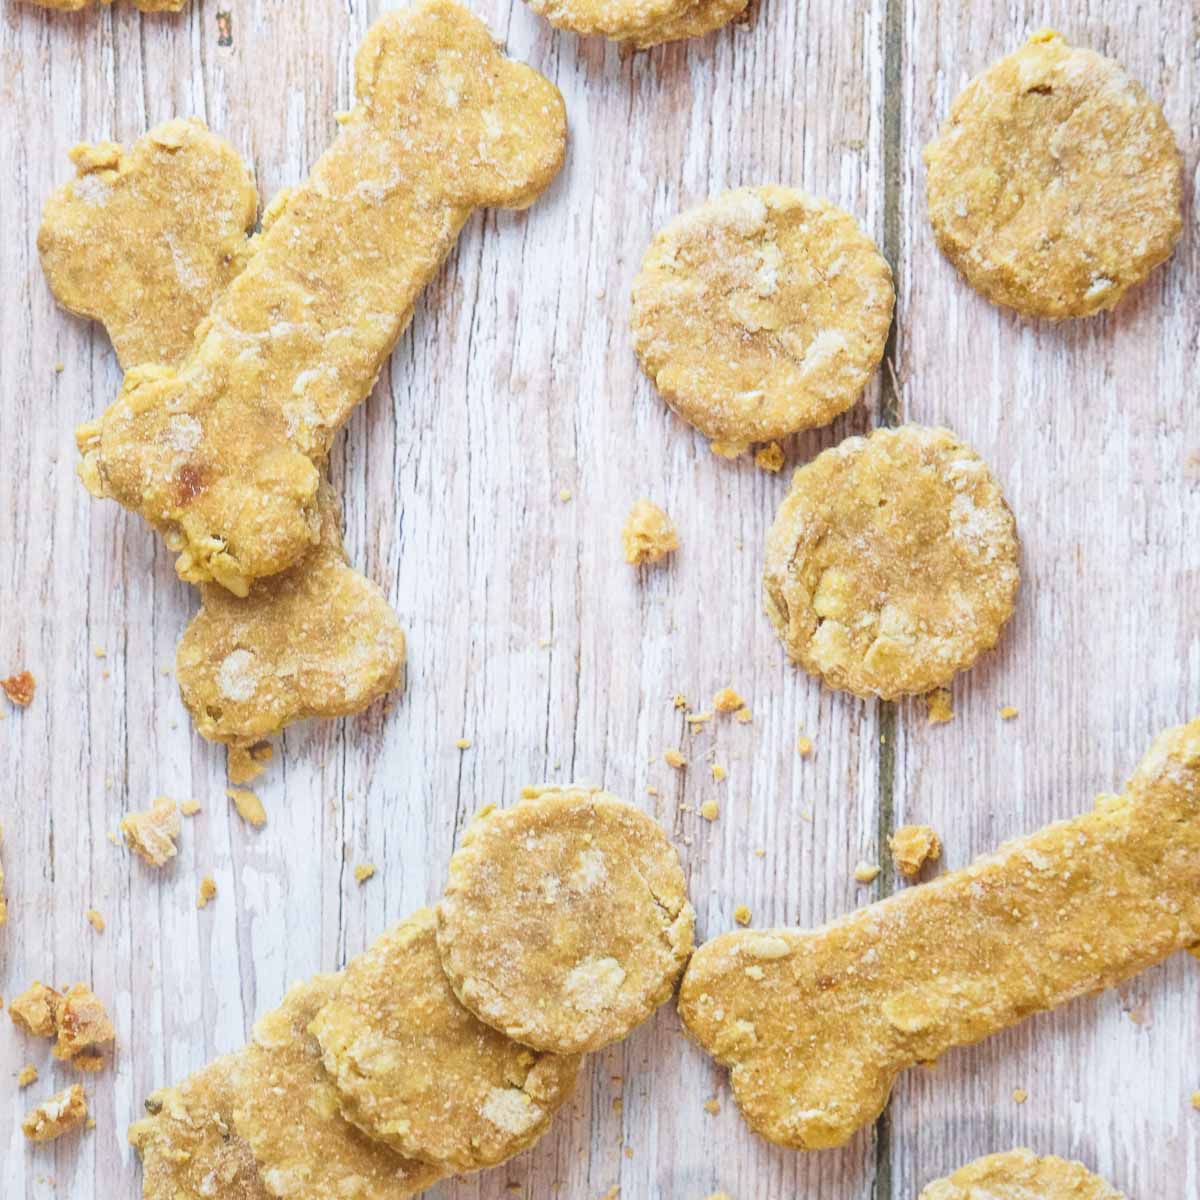 Easy Dehydrated Dog Treats Recipe- Peel with Zeal